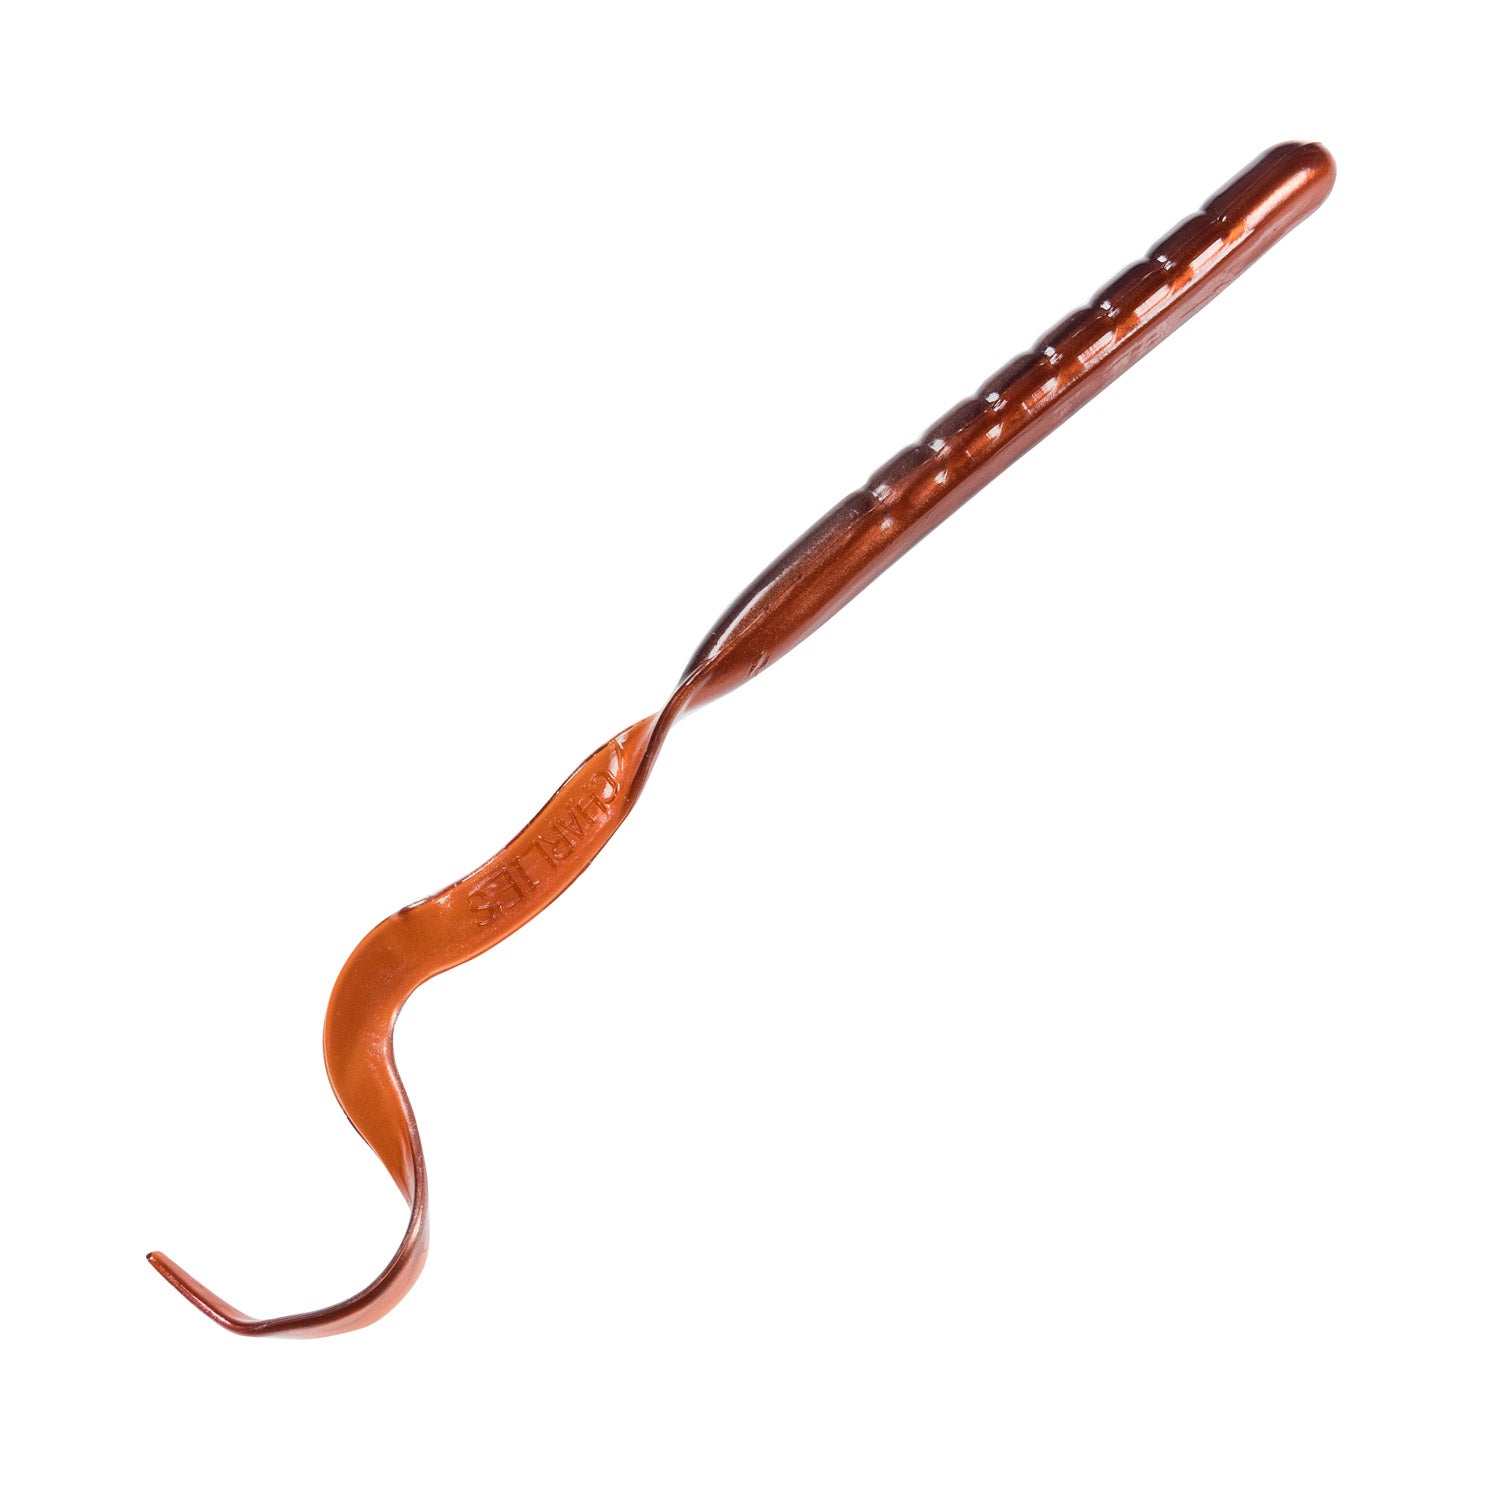 10 Ribbon Tail Swimming Worm - Black Moccasin